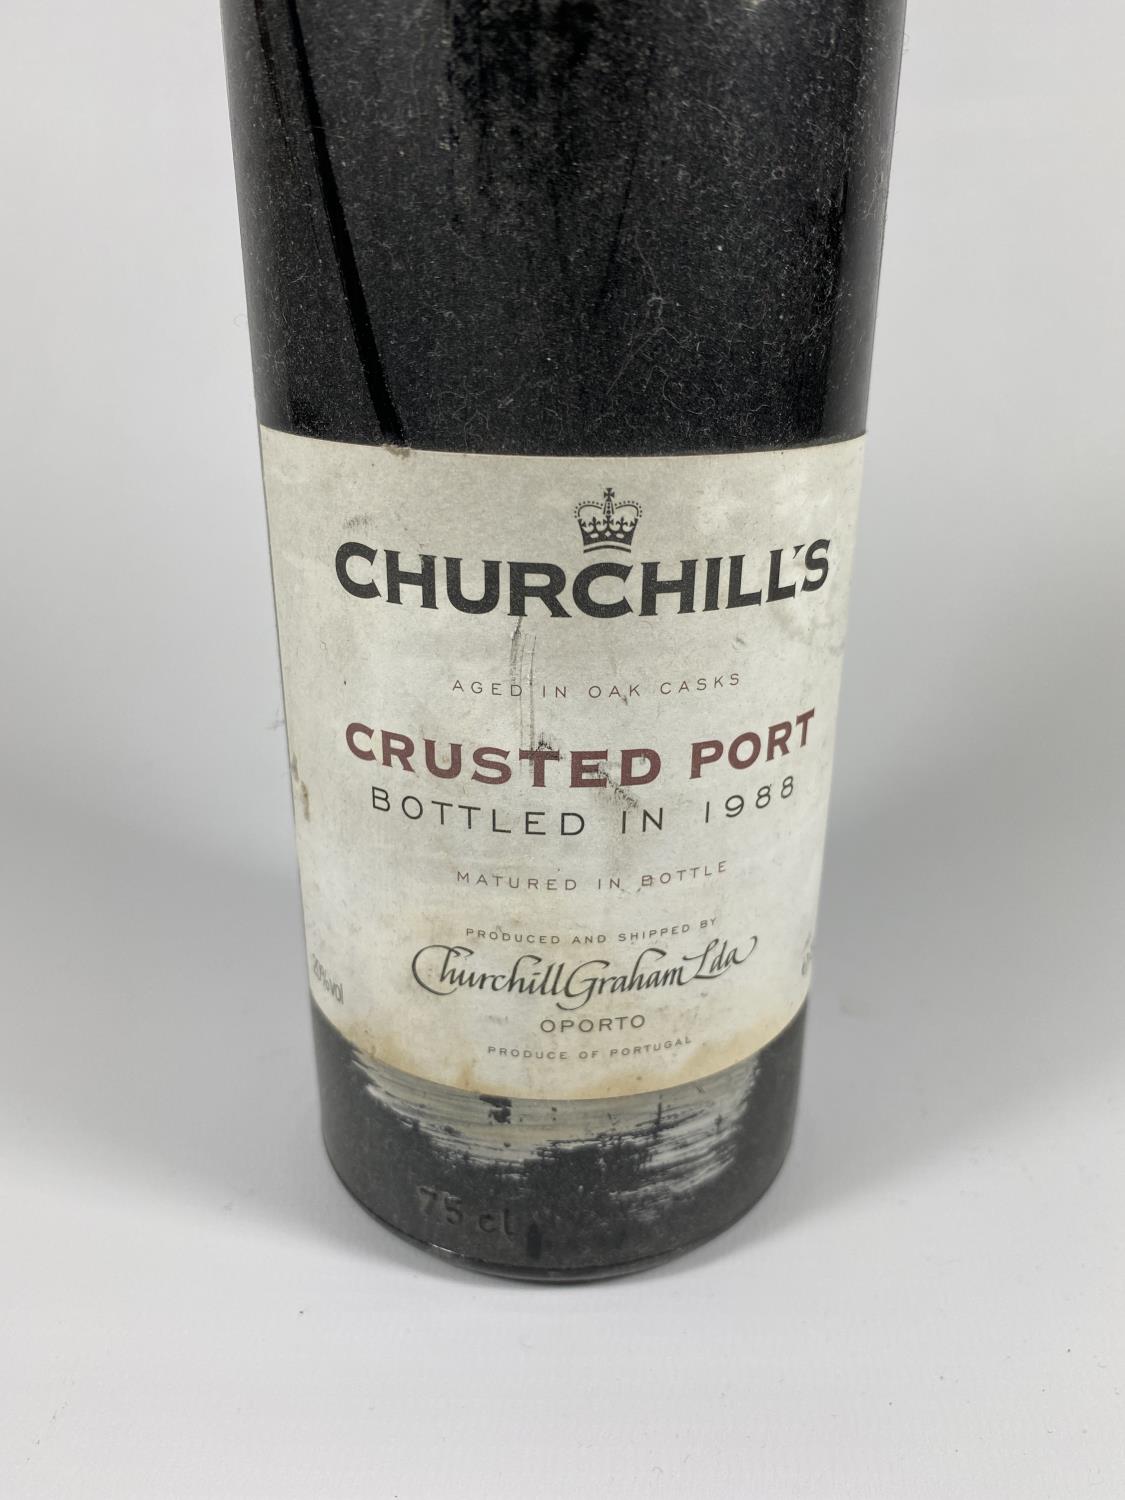 1 X 75CL BOTTLE - CHURCHILL'S CRUSTED 1988 VINTAGE PORT - Image 2 of 4